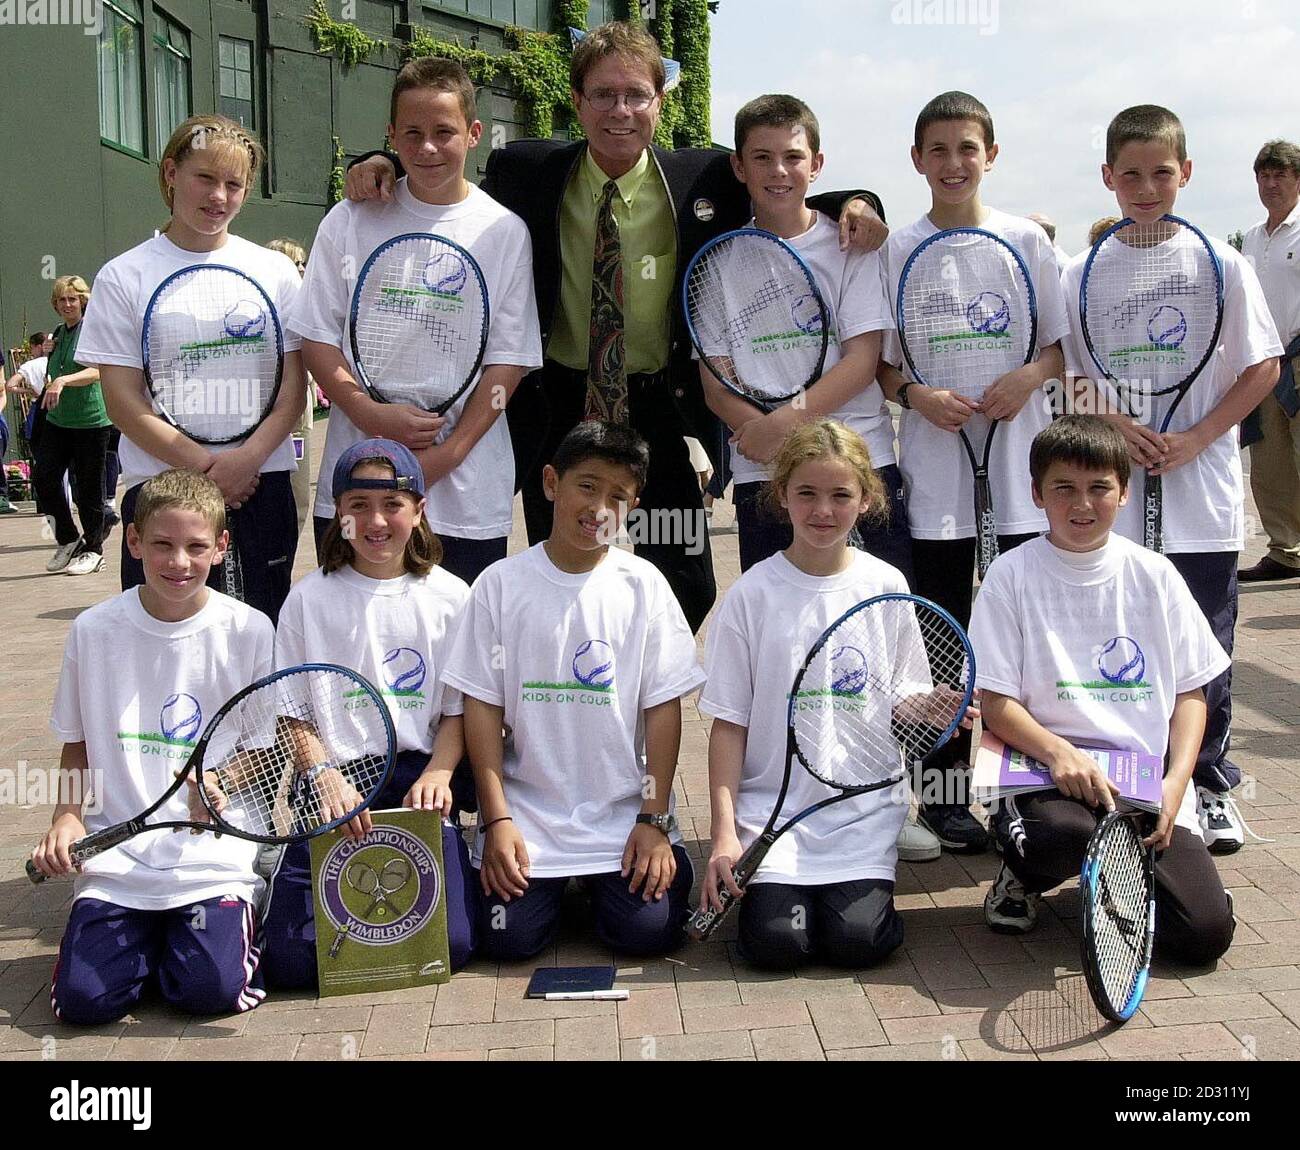 NO COMMERCIAL USE: Sir Cliff Richard meets a group of young tennis players at Wimbledon who are receiving coaching from his charity, the Cliff Richard Tennis Foundation. * This coincides with the launch of his 'Kids On Court' campaign aimed at giving all children the chance to try tennis. * Back row (left to right) : Maria Wisdom aged 13 from Portsmouth, Kevin Gissing 15 from Portsmouth, Sir Cliff Richard, Ben Frank 13 from Portsmouth, Matt Ward 13 from Portsmouth, Steven McKenzie 11 NO CPMMERCIAL USE: from Sterling. Front row (left to right): Robert Wood 13 from Redbridge, Francesca Jack Stock Photo